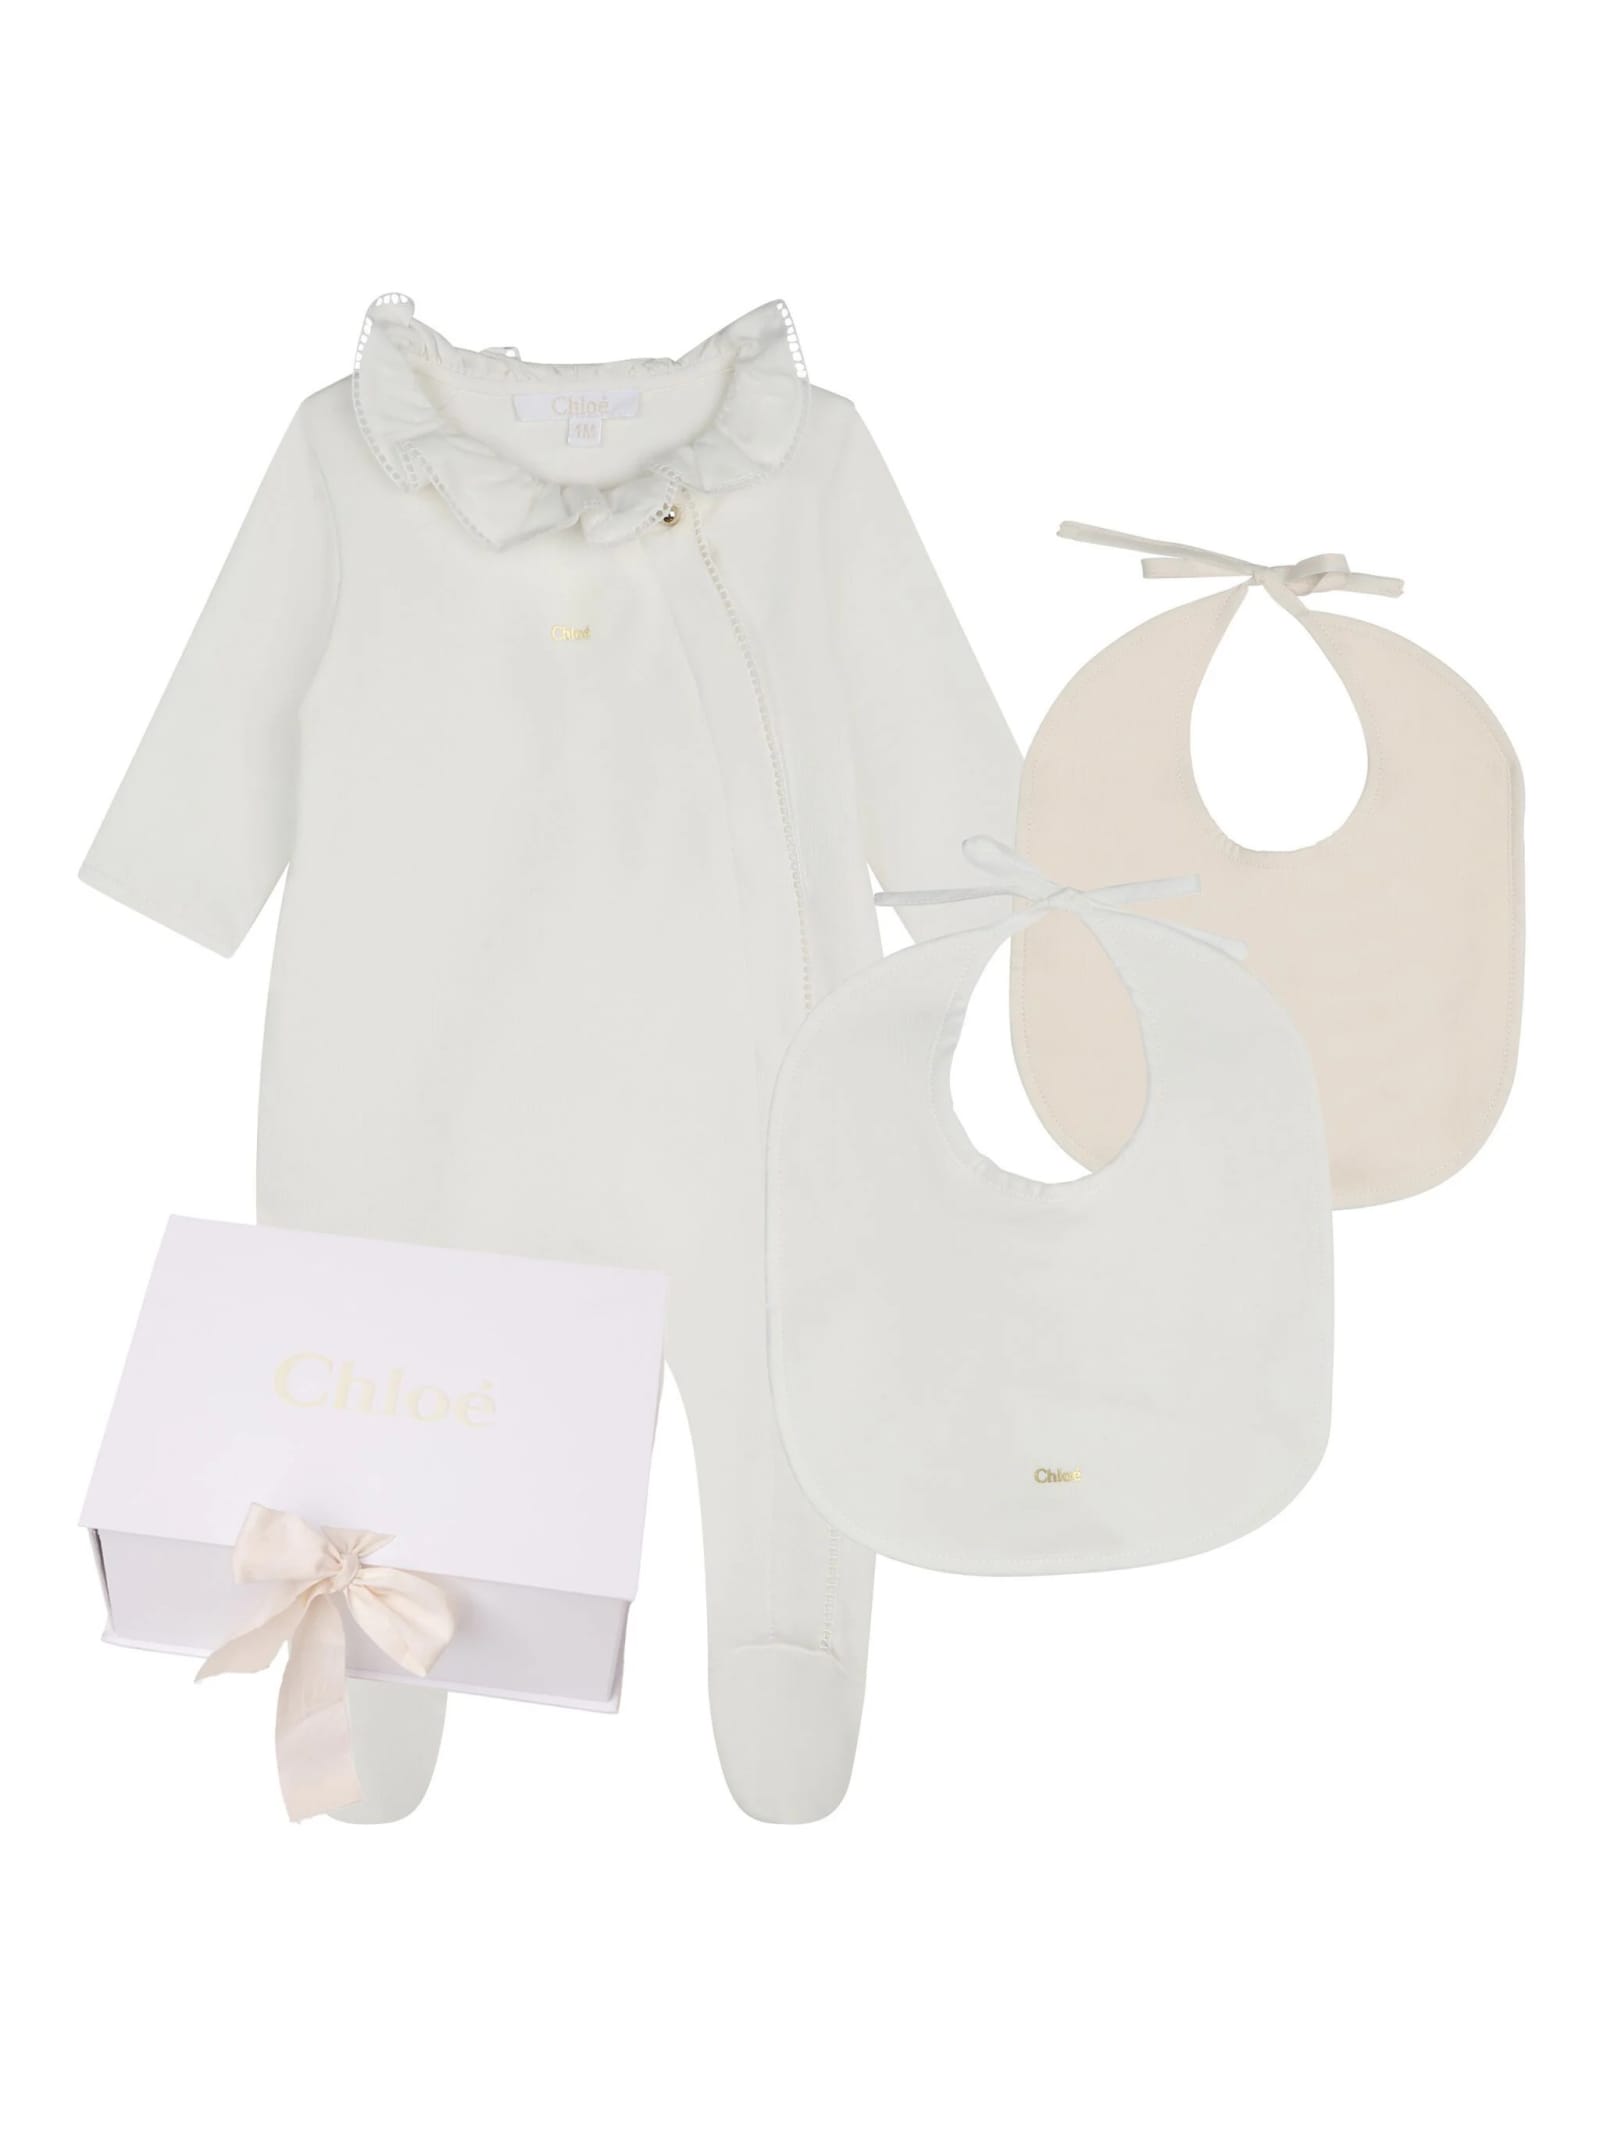 CHLOÉ GIFT SET WITH PLAYSUIT AND BIBS